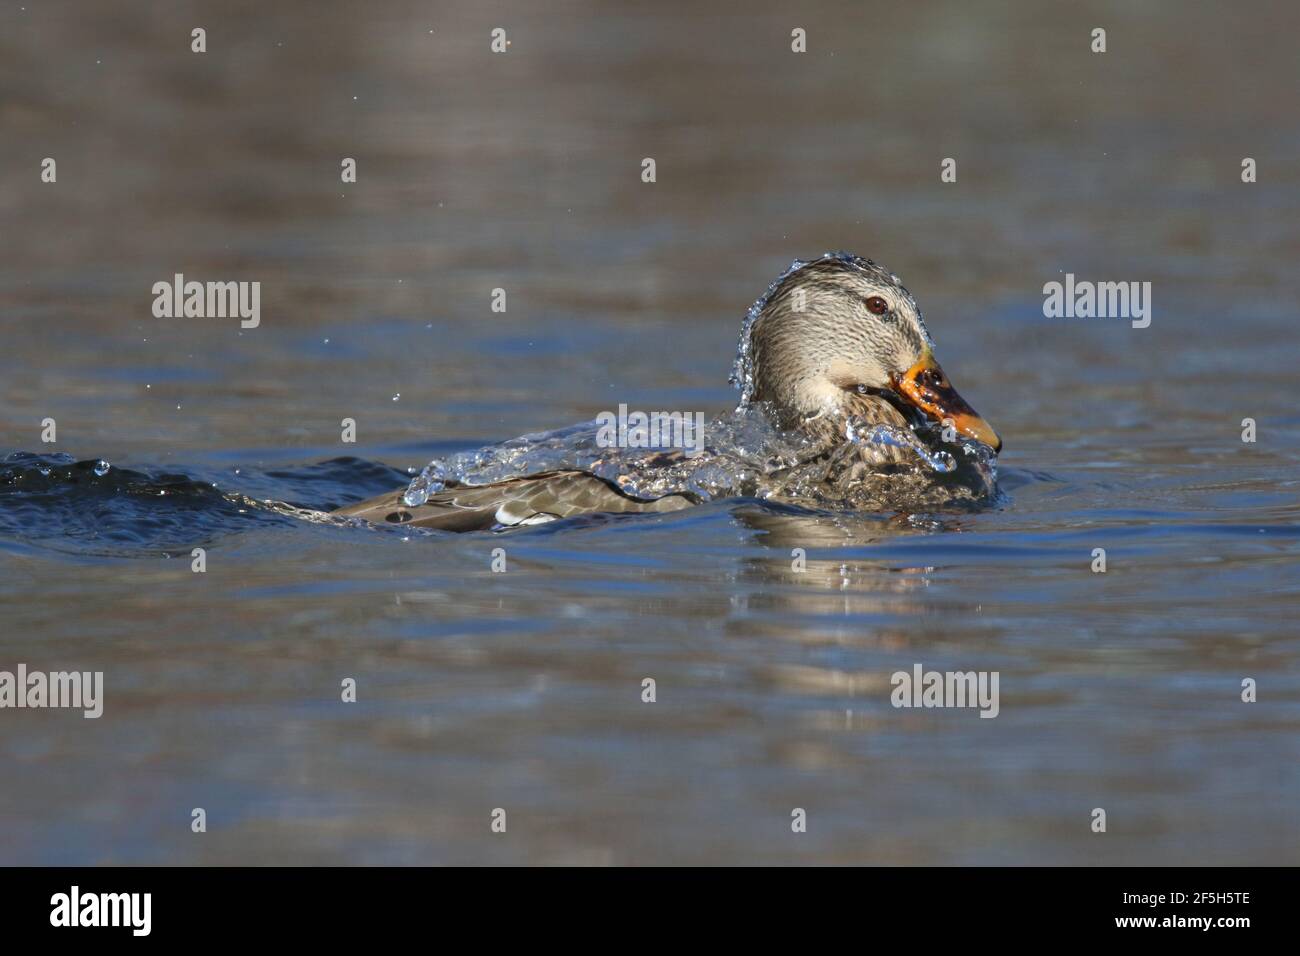 Water falling off the back of a mallard duck Anas platyryhnchos as it surfaces on a lake in winter Stock Photo